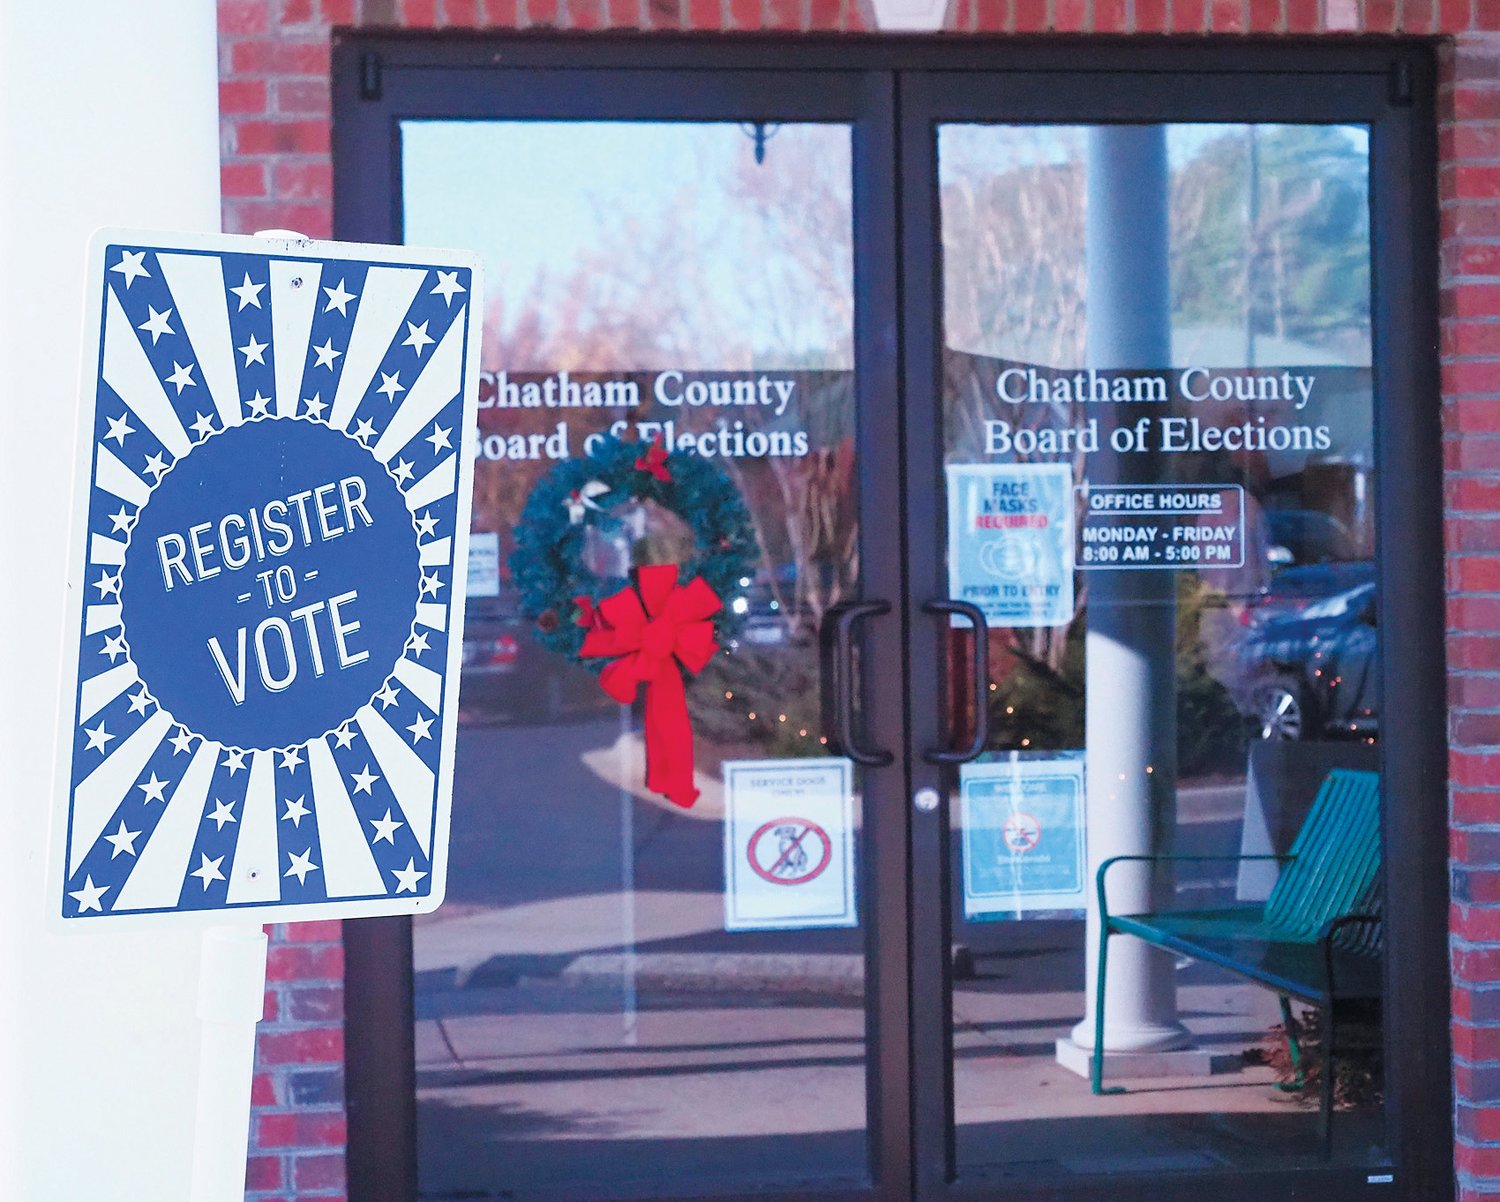 Filing for the March 2022 primary in Chatham started at noon Dec. 6 and was set to end at noon on Friday, Dec. 17. Instead, on Dec. 8, filing was halted and the primary pushed back to May 17.